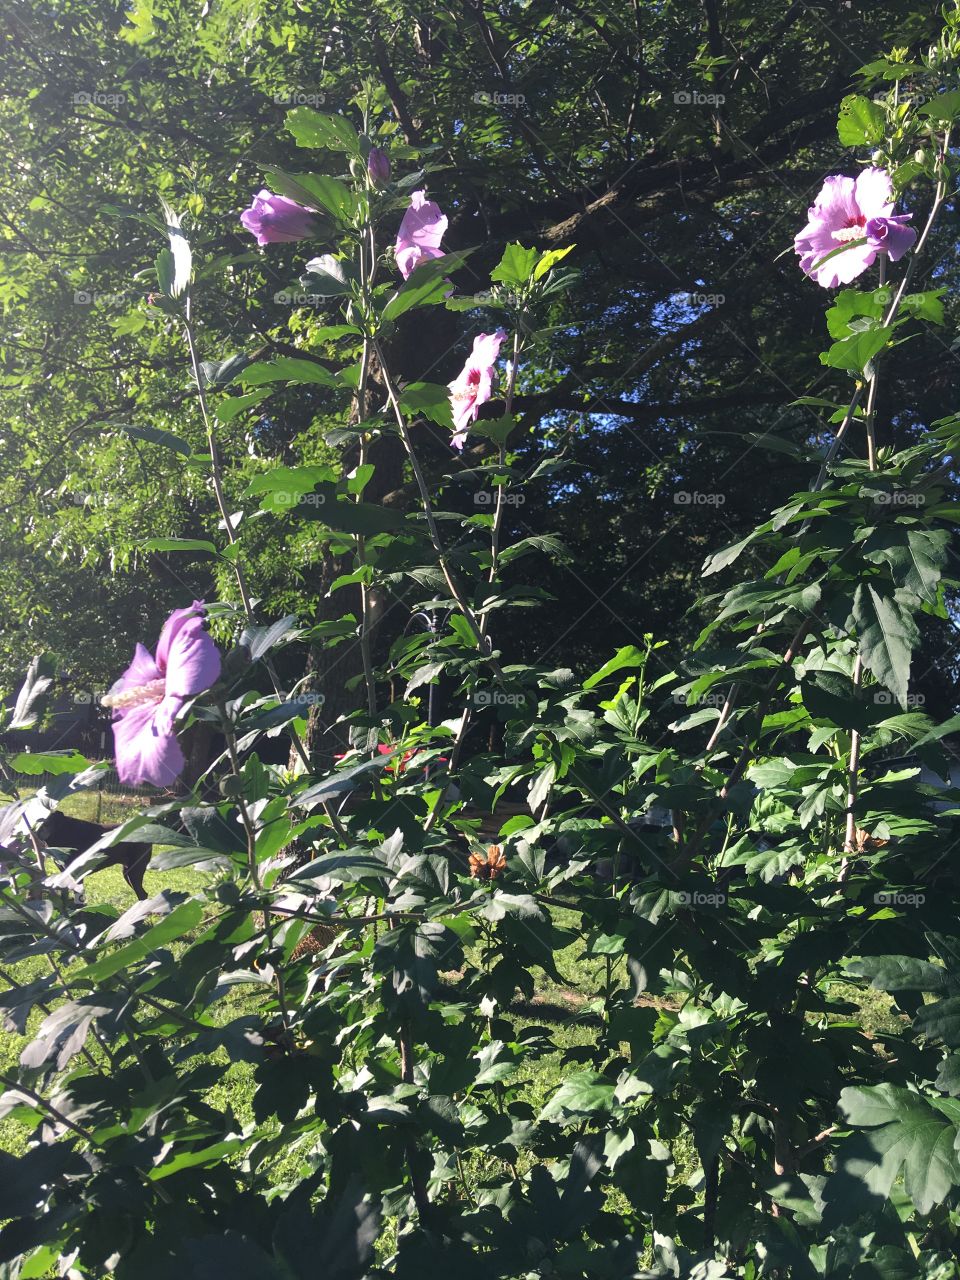 Wonderful sunny happy day for my rose of Sharon happily blooming! 